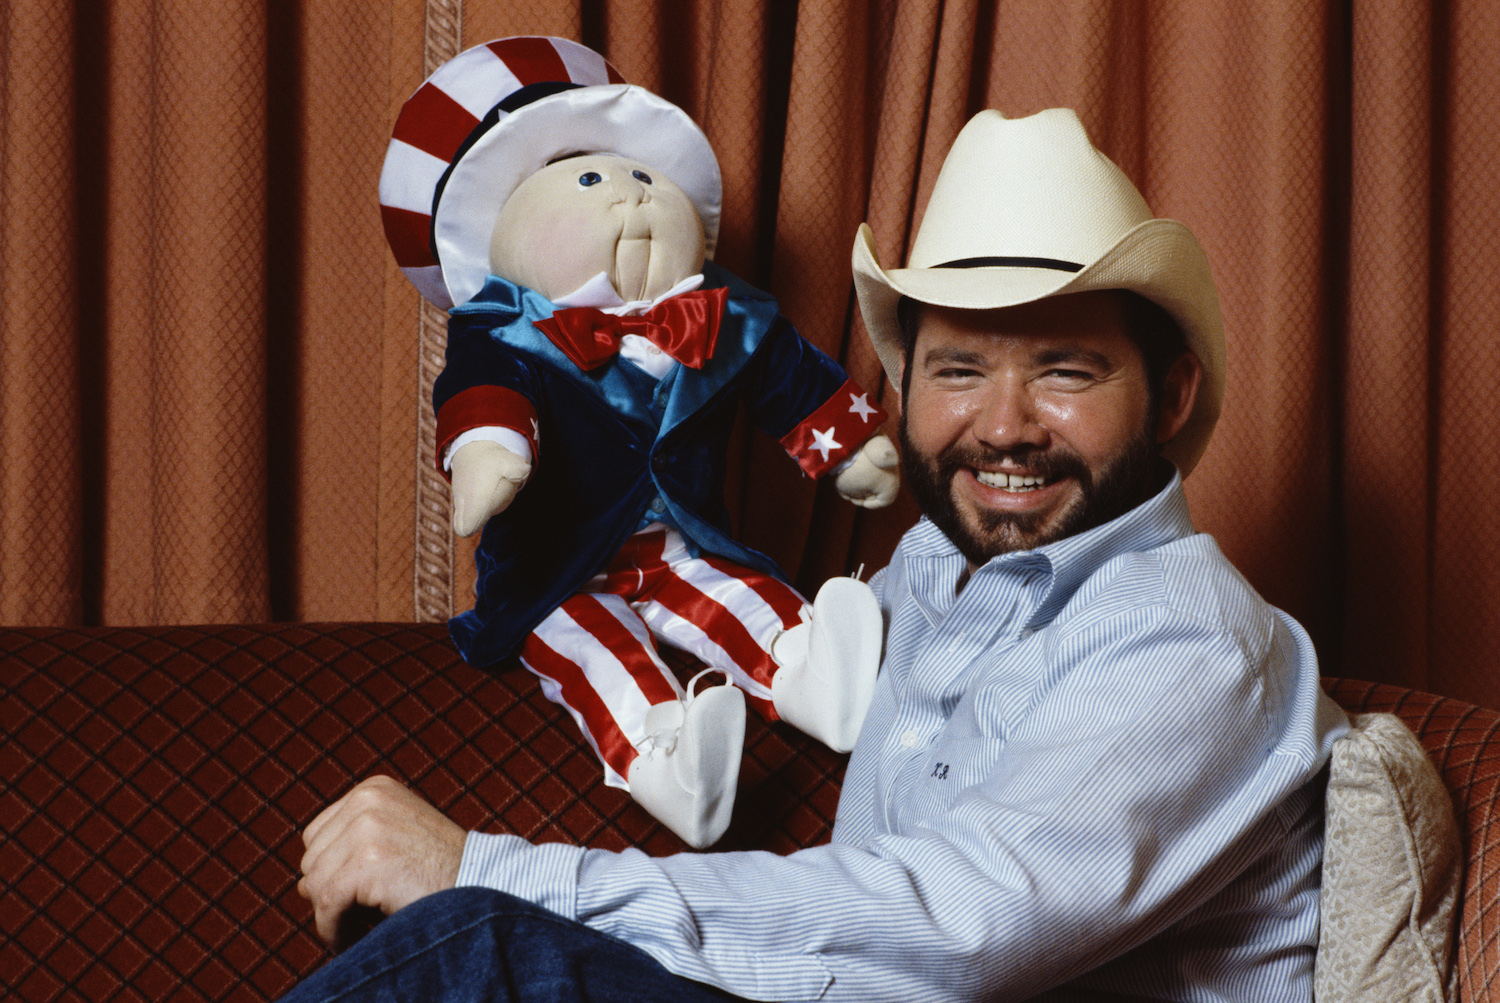 1985 xavier roberts cabbage patch doll